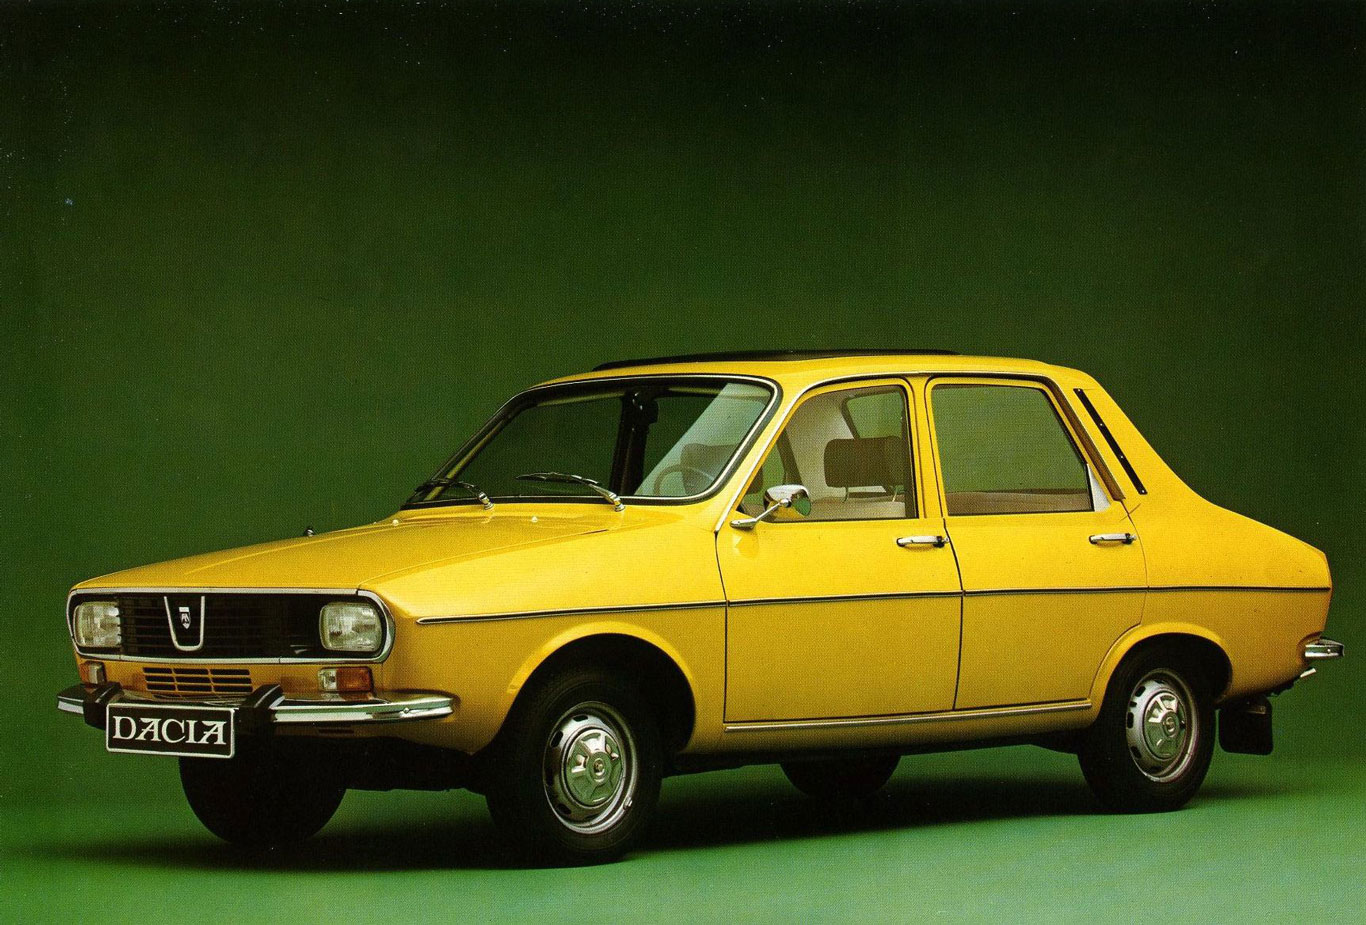 Dacia launched its 1300 in 1969 and it remained on sale until 2004. What was it based on?